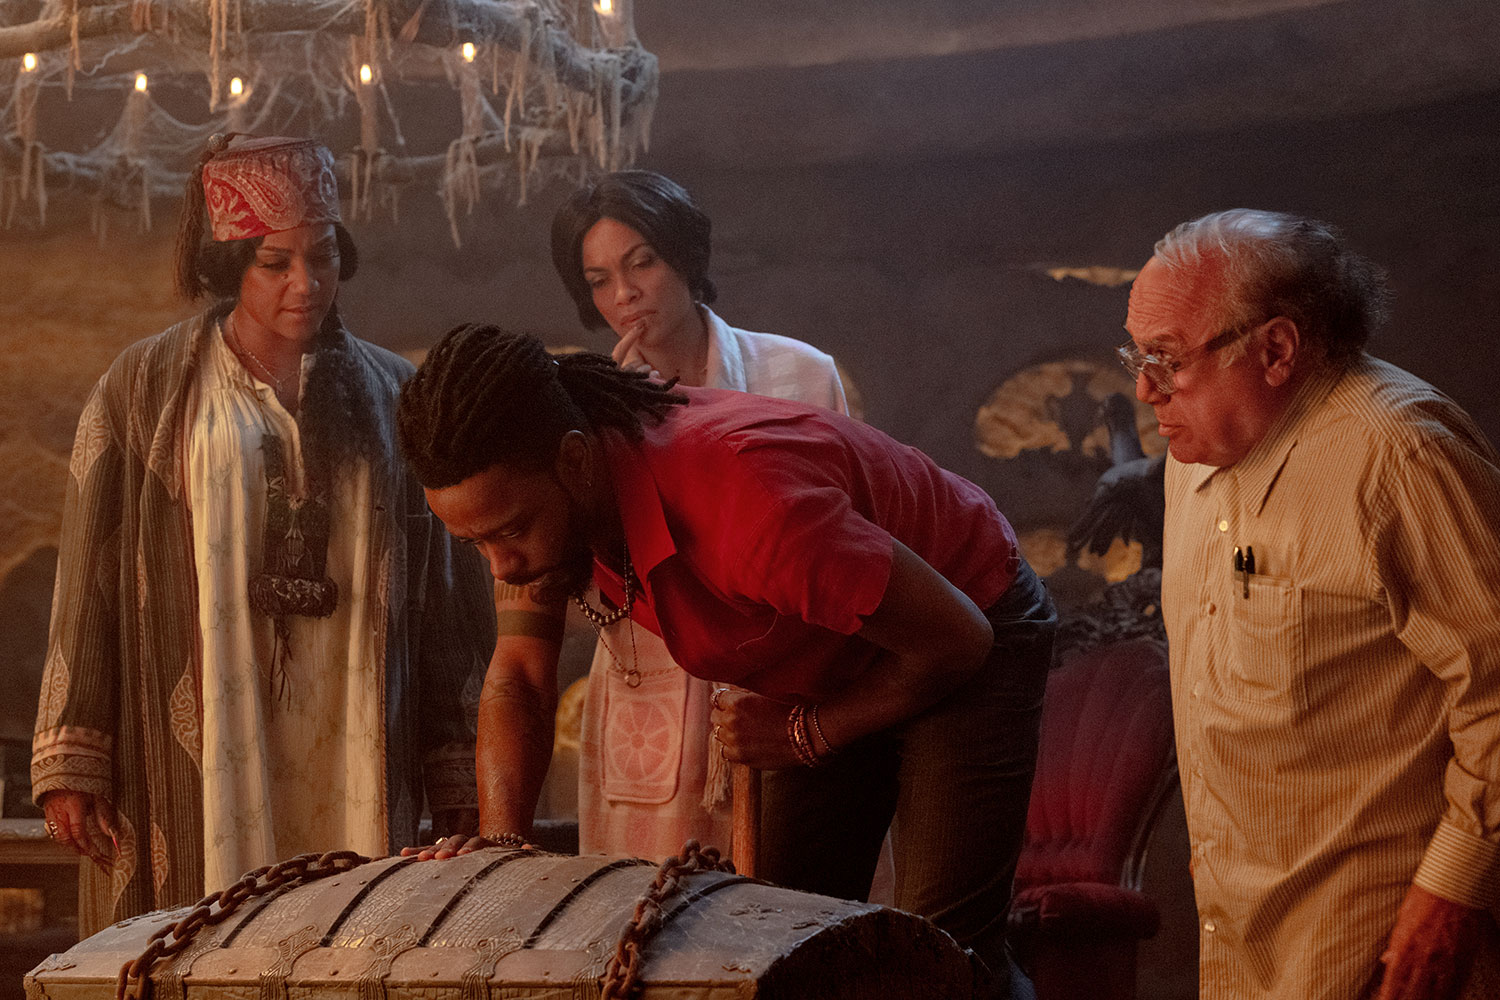 (L-R): Tiffany Haddish as Harriet, Rosario Dawson as Gabbie, LaKeith Stanfield as Ben, and Danny DeVito as Bruce in Disney's live-action HAUNTED MANSION. Photo by Jalen Marlowe. © 2023 Disney Enterprises, Inc. All Rights Reserved.